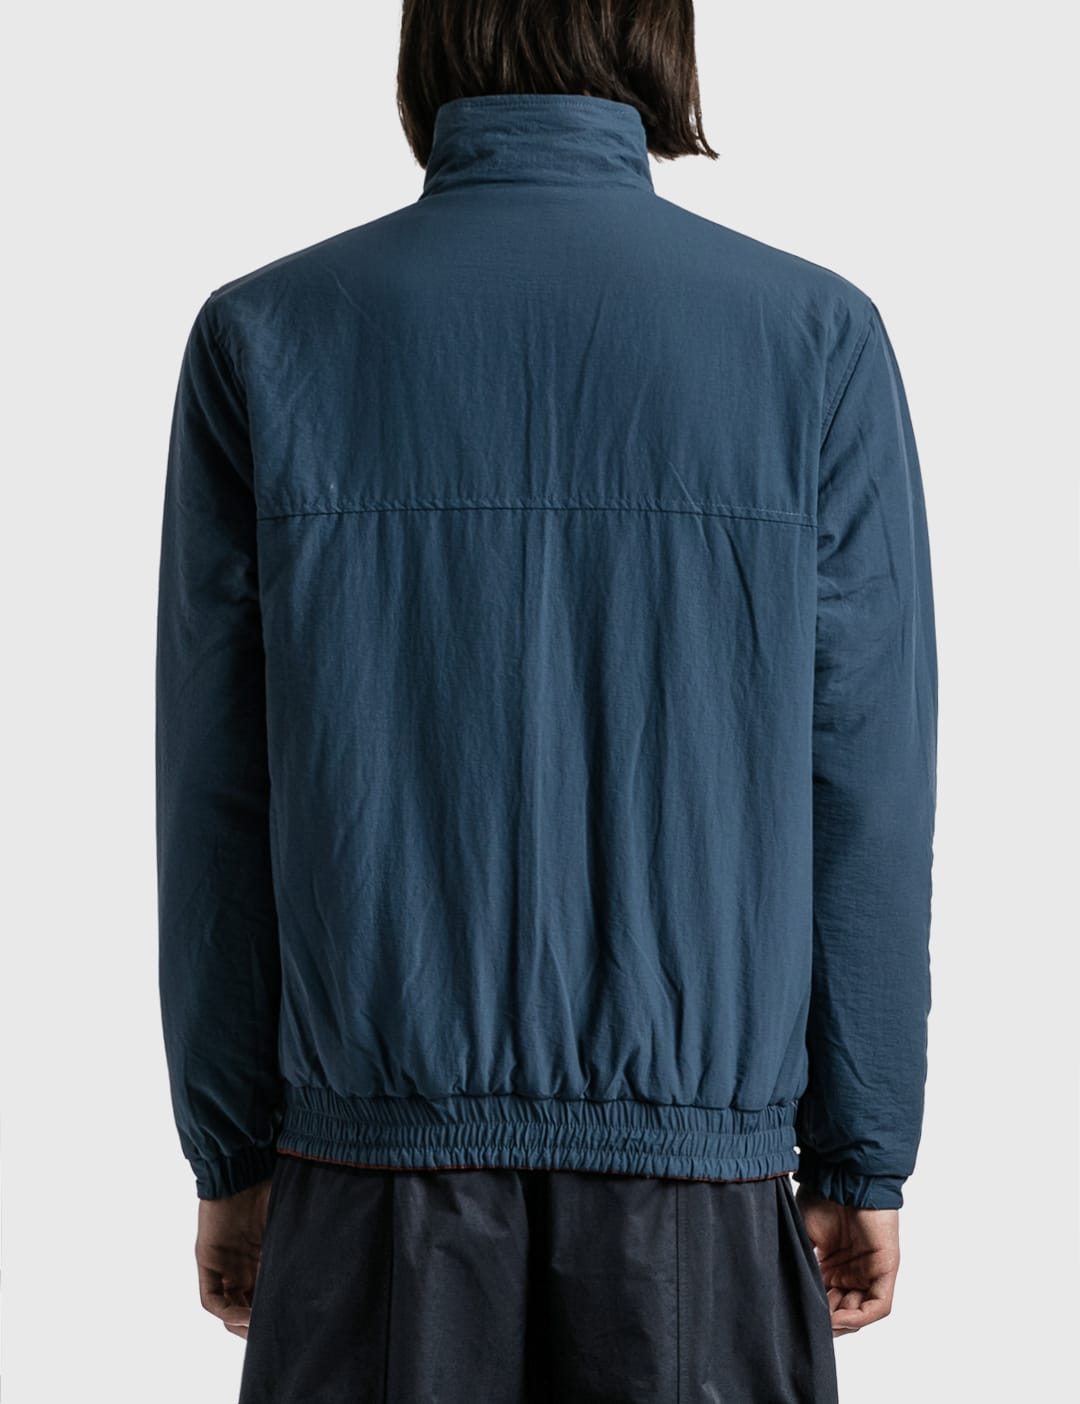 Butter Goods   Lodge Cord Reversible Jacket   HBX   Globally